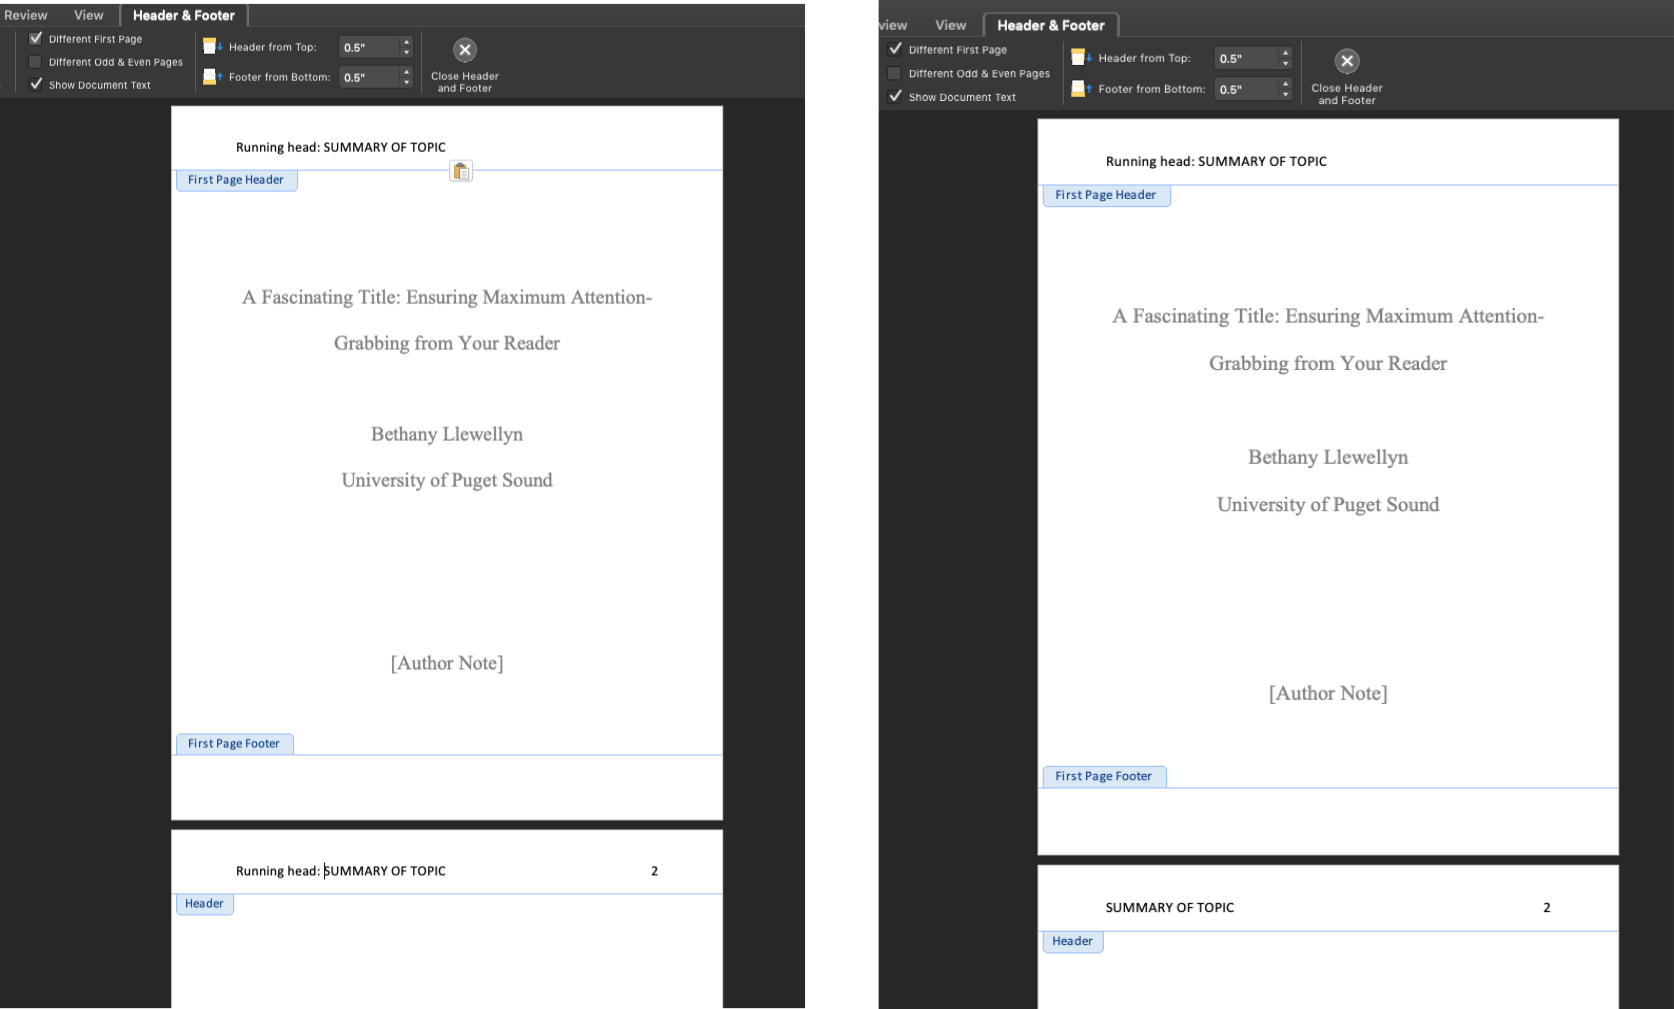 This image shows the same word document, duplicated in left and right-hand panes. On the left pane, the "Header and Footer" toolbar is open at the top of the frame and the option "Different first page" has been checked. The header of the second page of the document is visible. It reads "Running head: SUMMARY OF TOPIC," identical to the first page, but the cursor is placed before the "S" in "SUMMARY." The right-hand page is identical, but "Running head" has been removed from the header on the second page. It remains on the first page.